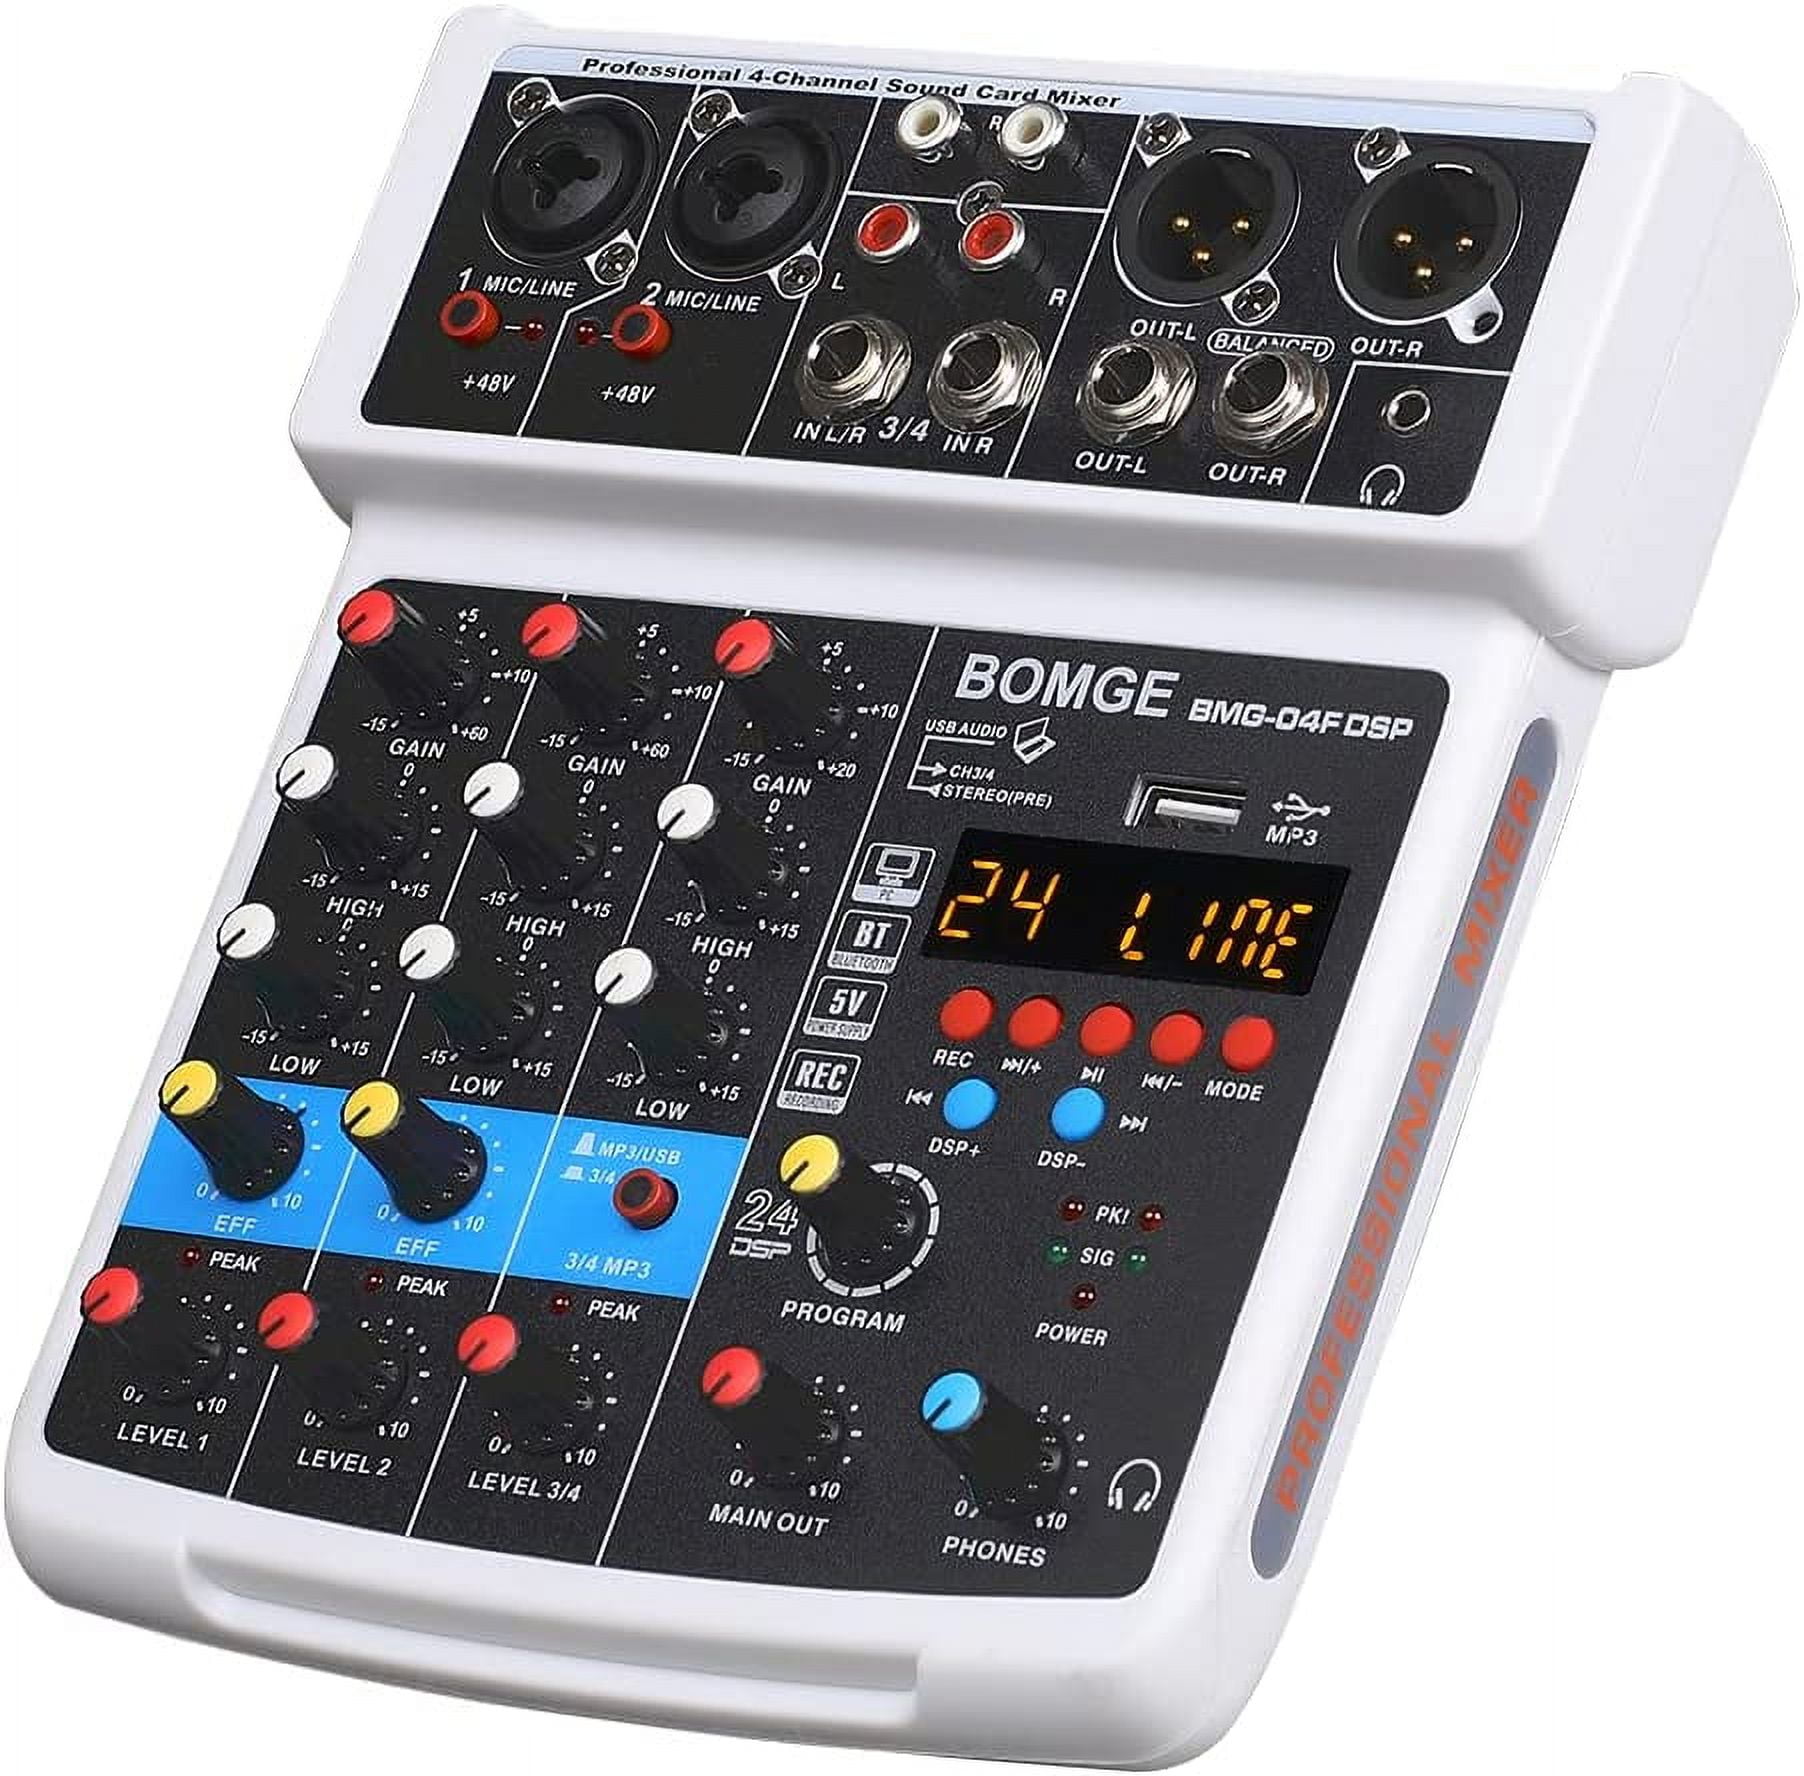 Asmuse 4 Channel Audio Mixer, Portable Mini Sound Mixer Console with USB,  Portable Digital Sound Interface for PC Recording/DJ stage/Broadcast